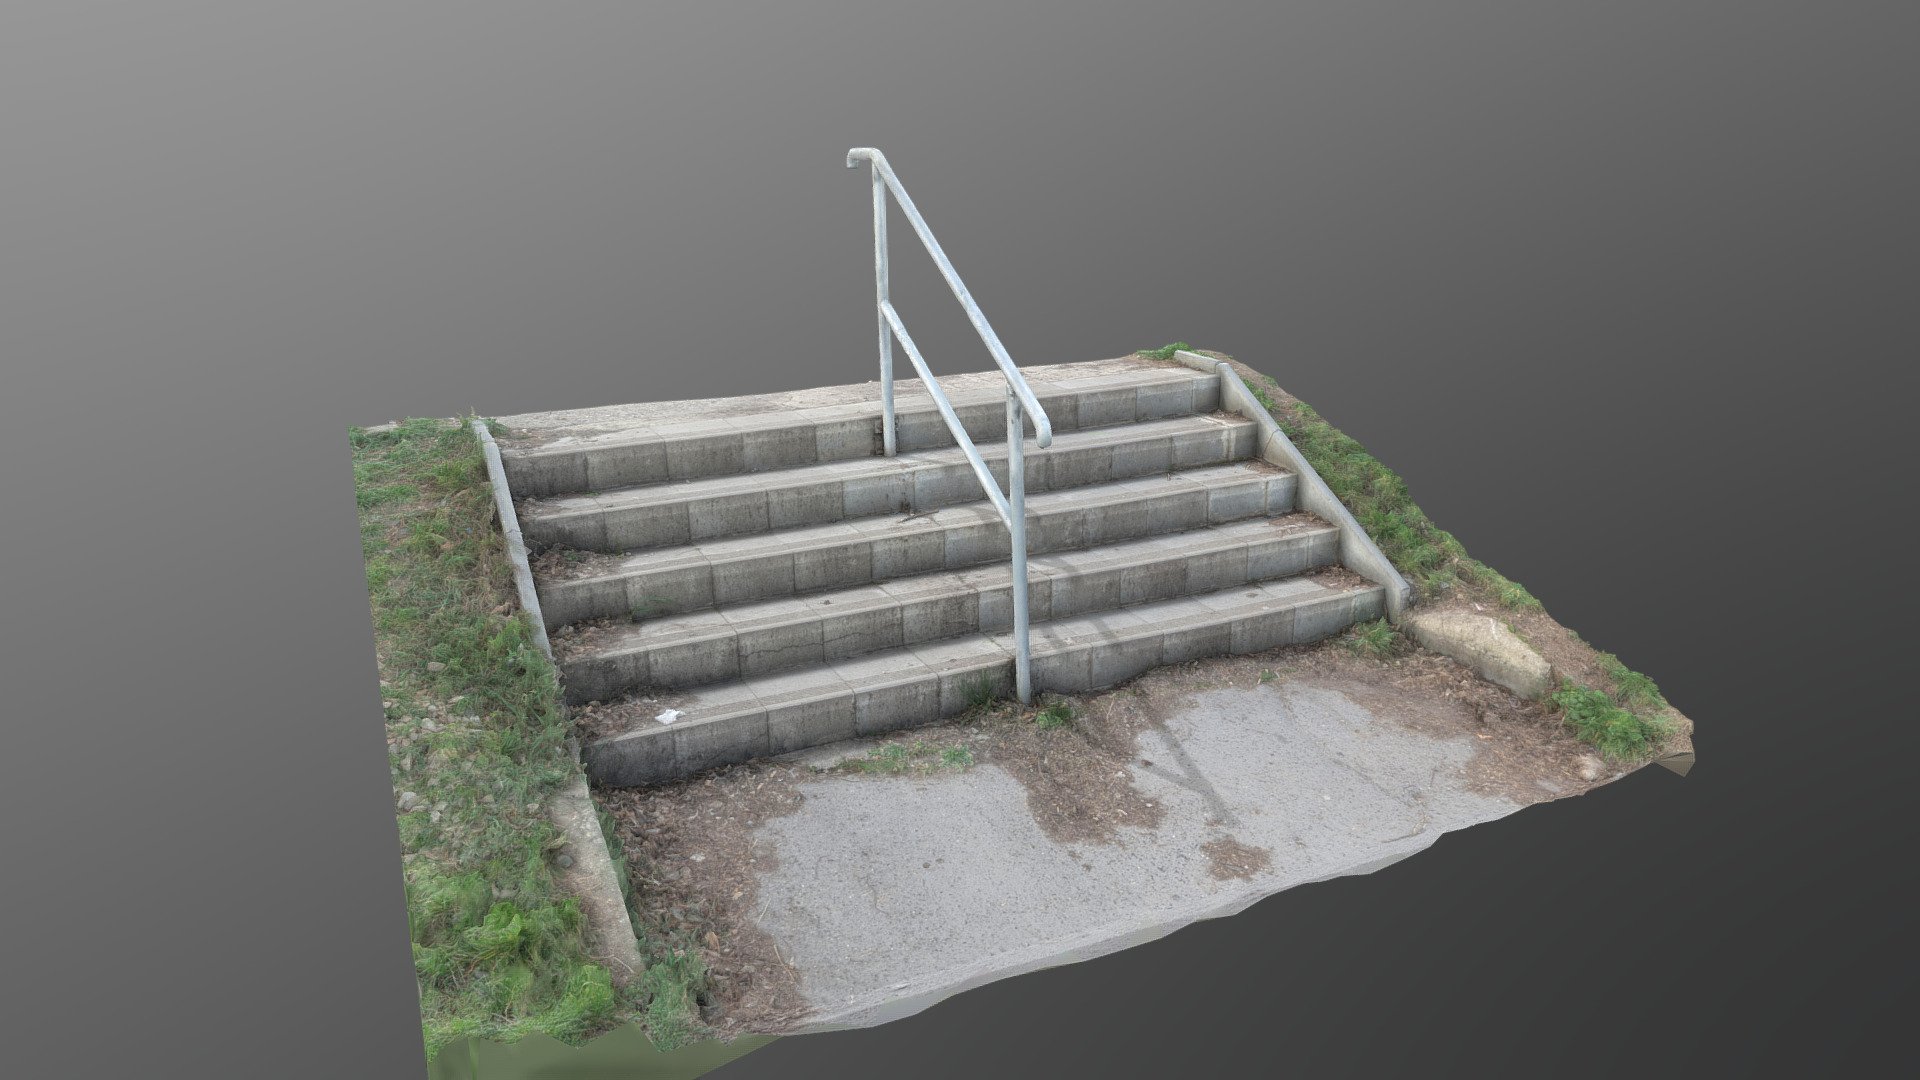 City urban steps concrete stairway with metal railing

photogrammetry scan (360 x 24MP) - Steps concrete stairway with metal railing - Buy Royalty Free 3D model by matousekfoto 3d model